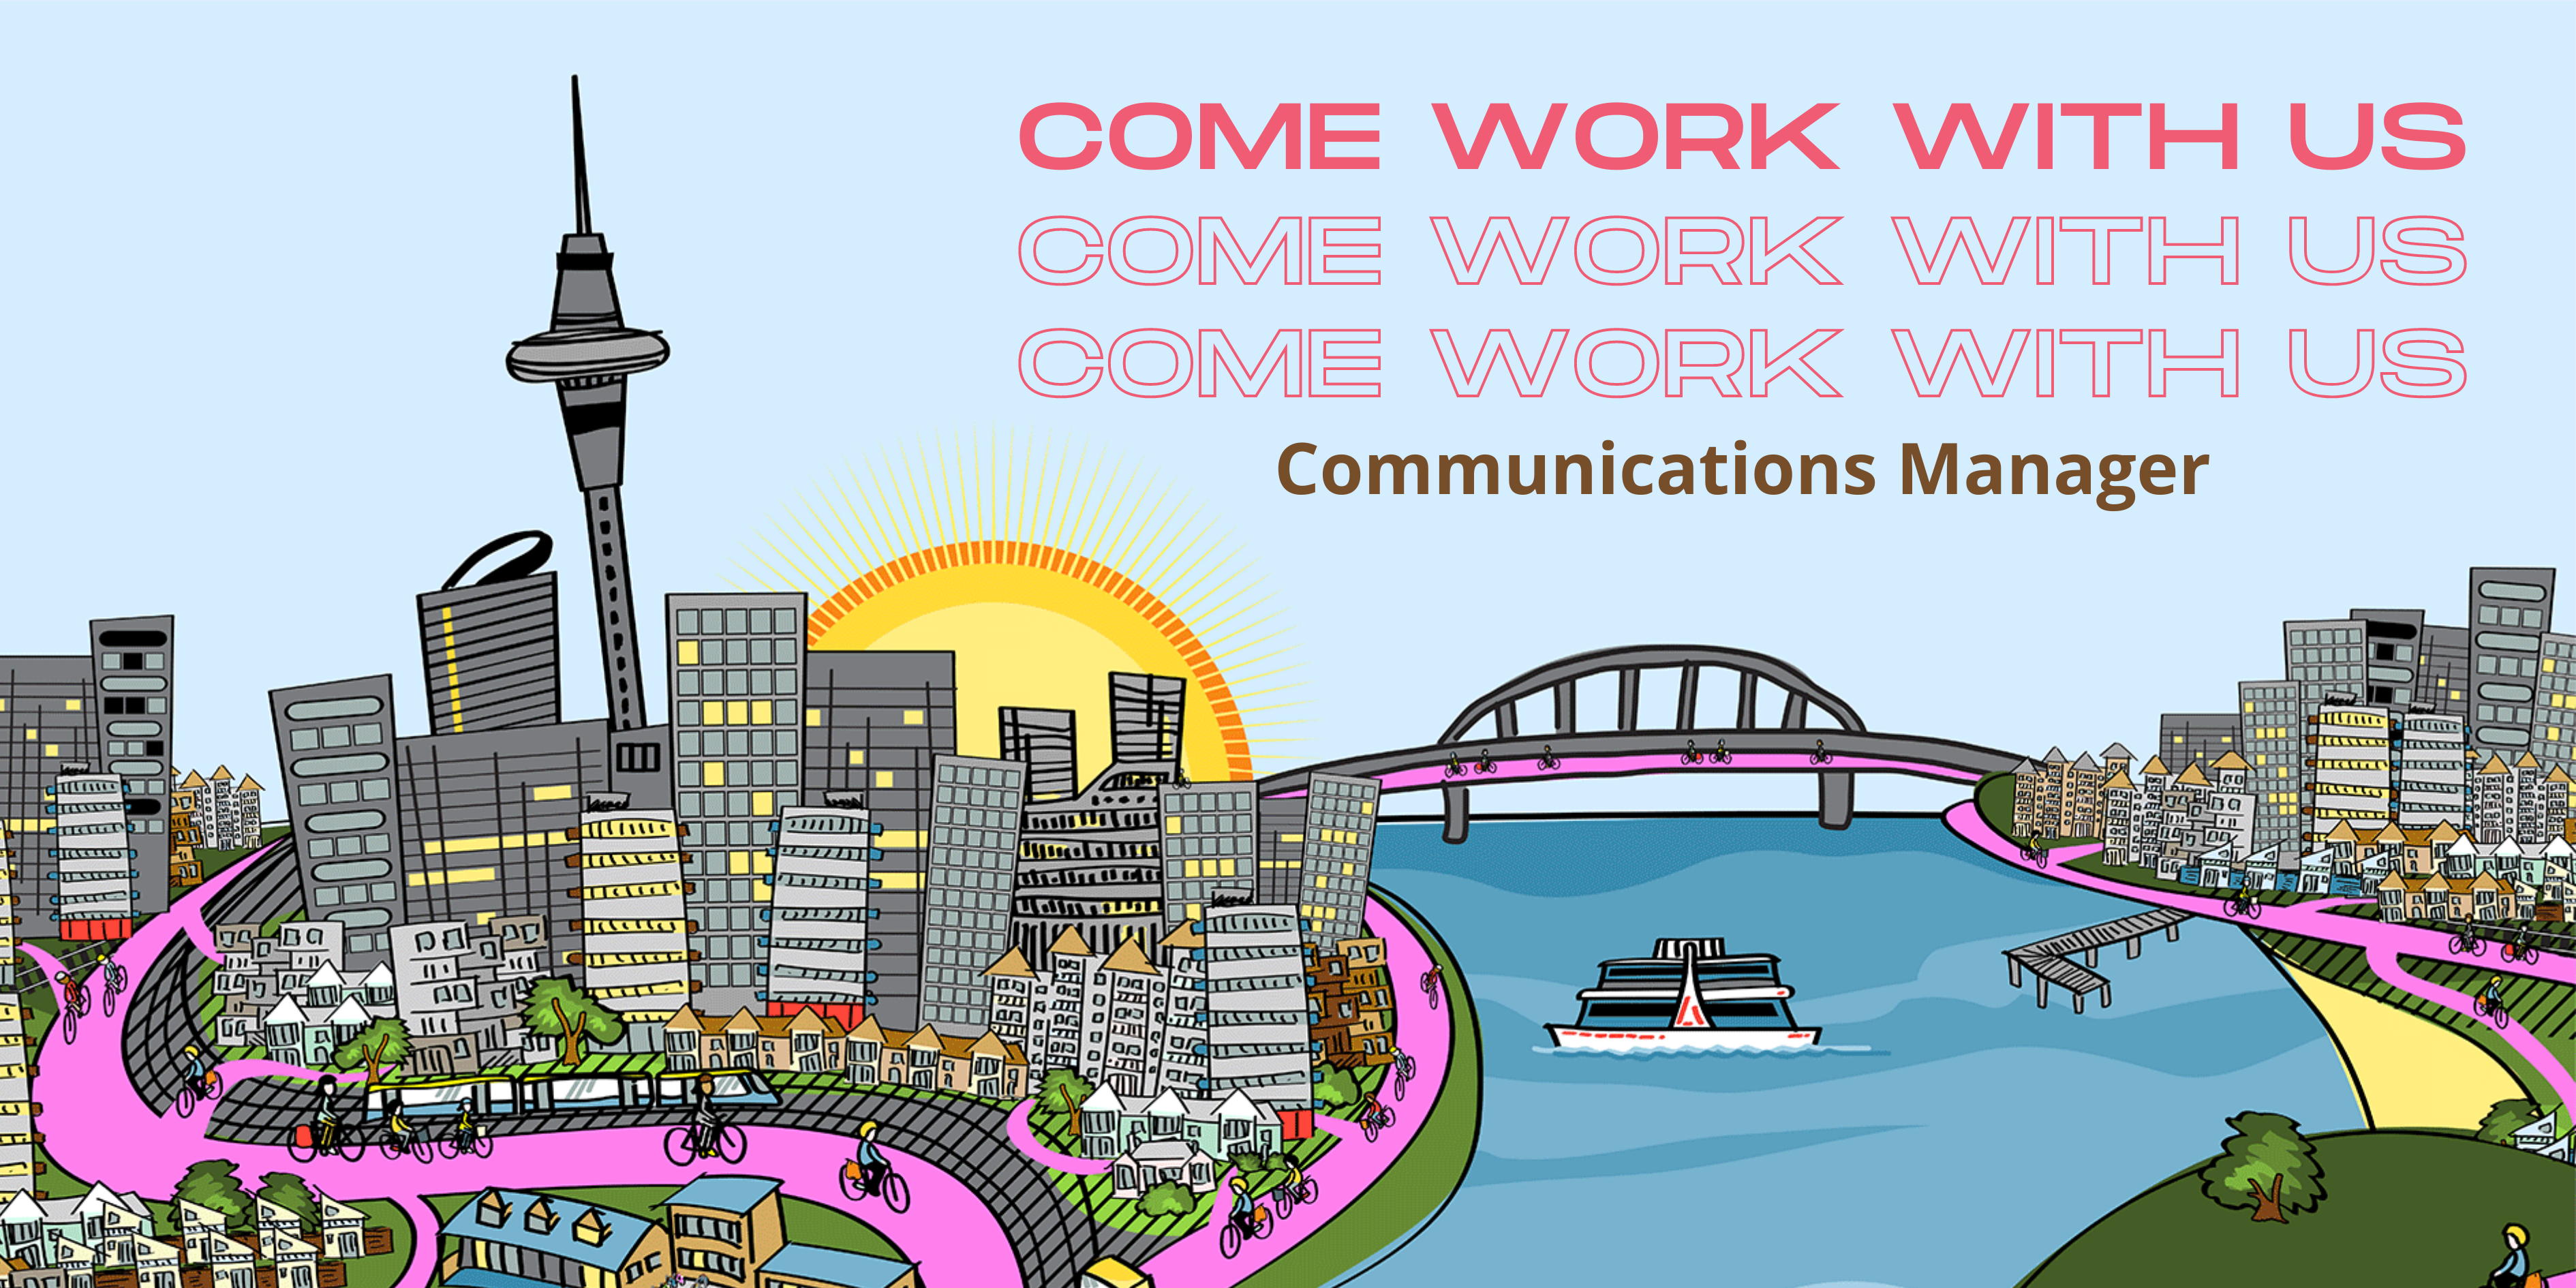 Come work with us – Communications Manager